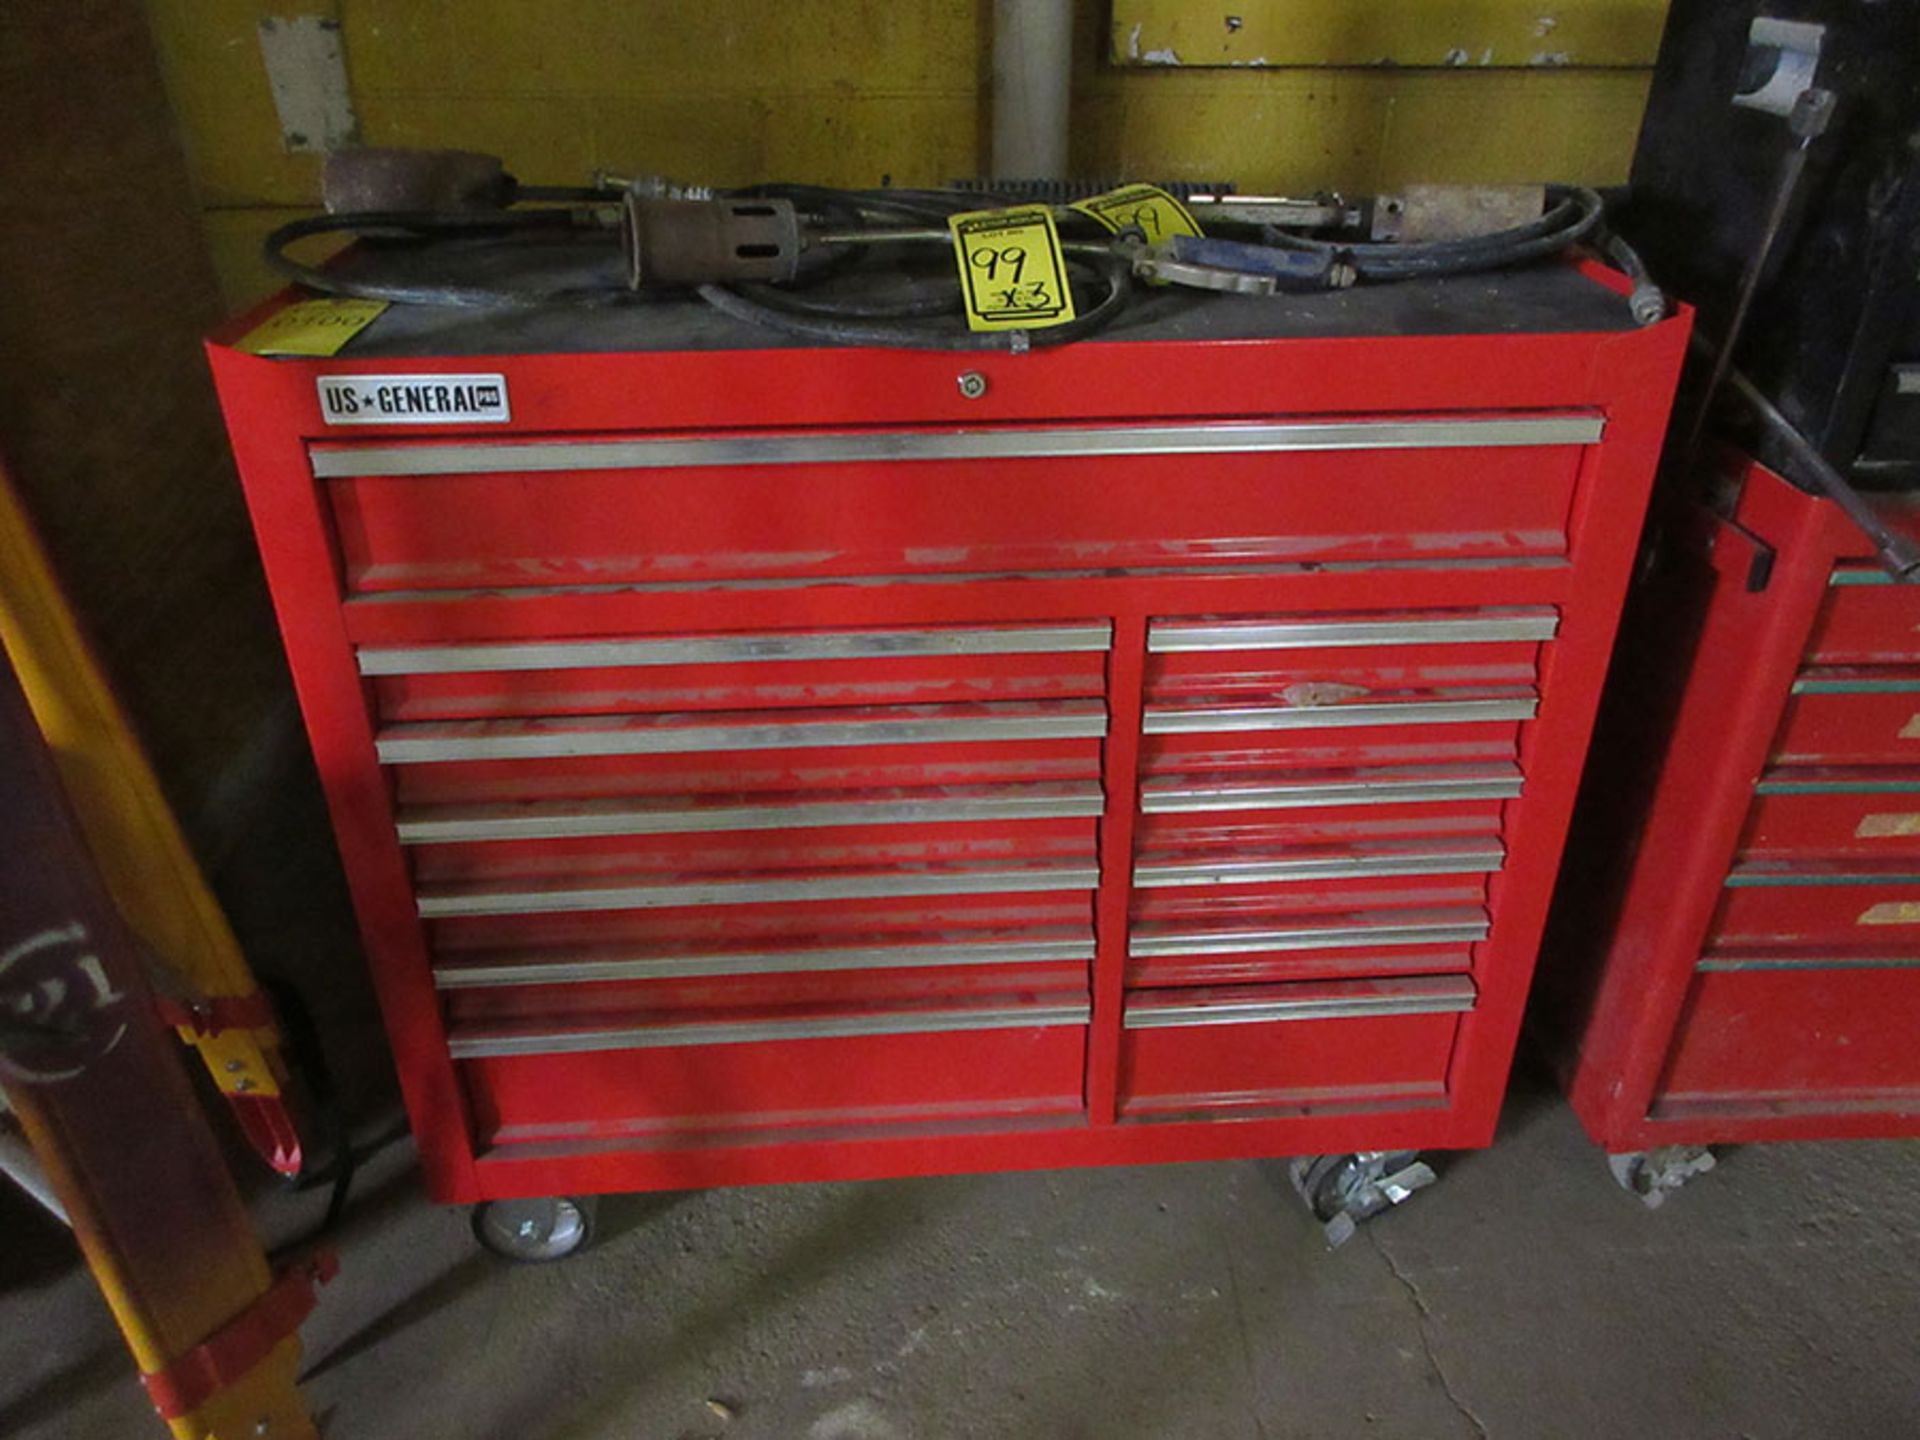 US GENERAL 13-DRAWER TOOL CHEST WITH CONTENTS